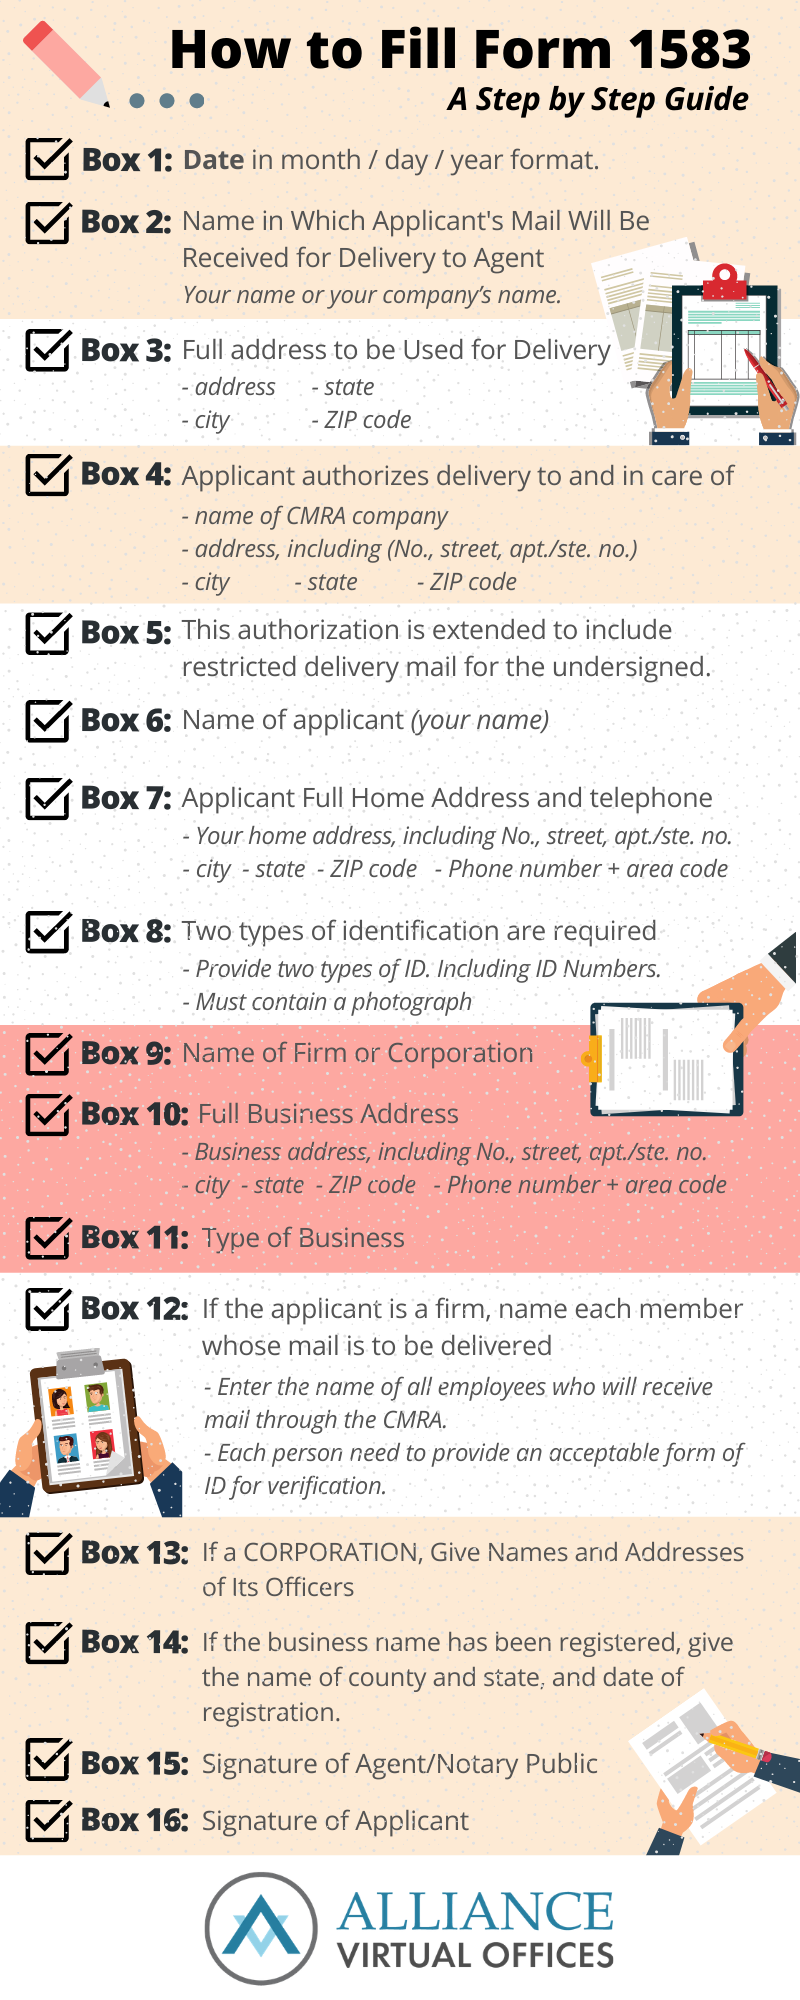 How to Fill USPS Form 1583 (Step by Step) - infographic